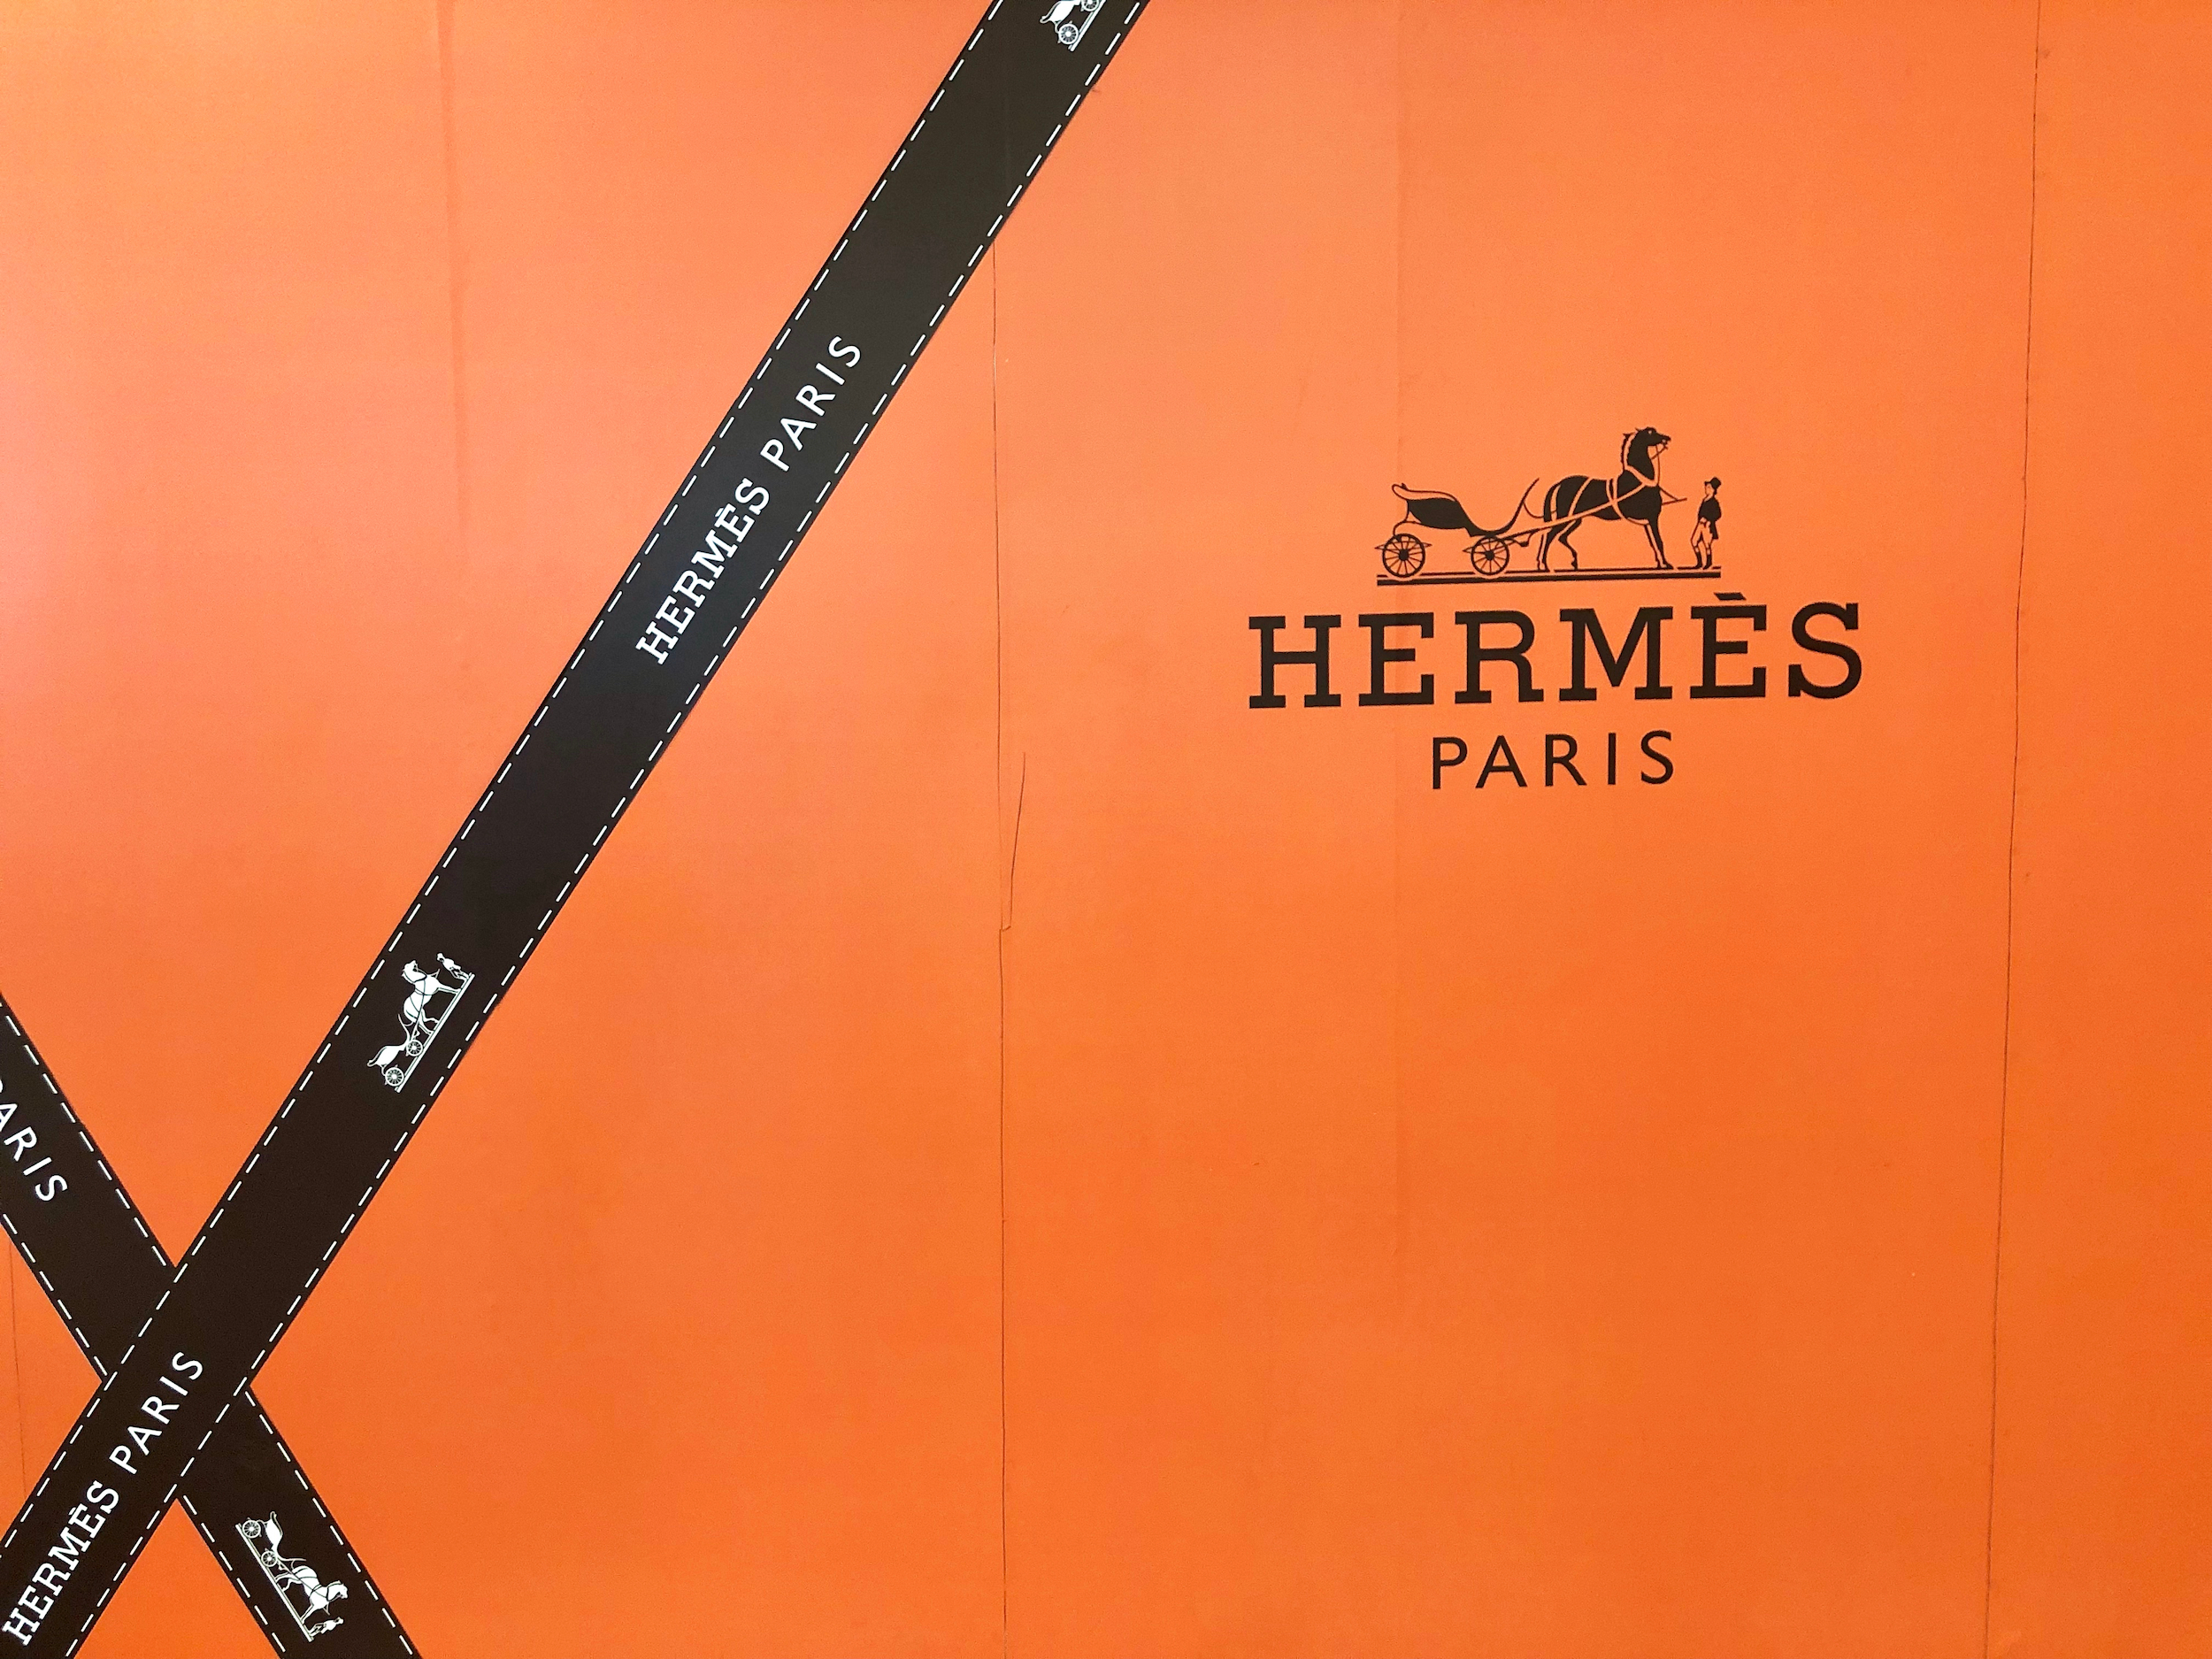 Hermès vs. Chanel: Which Is More Expensive? - Luxury Viewer